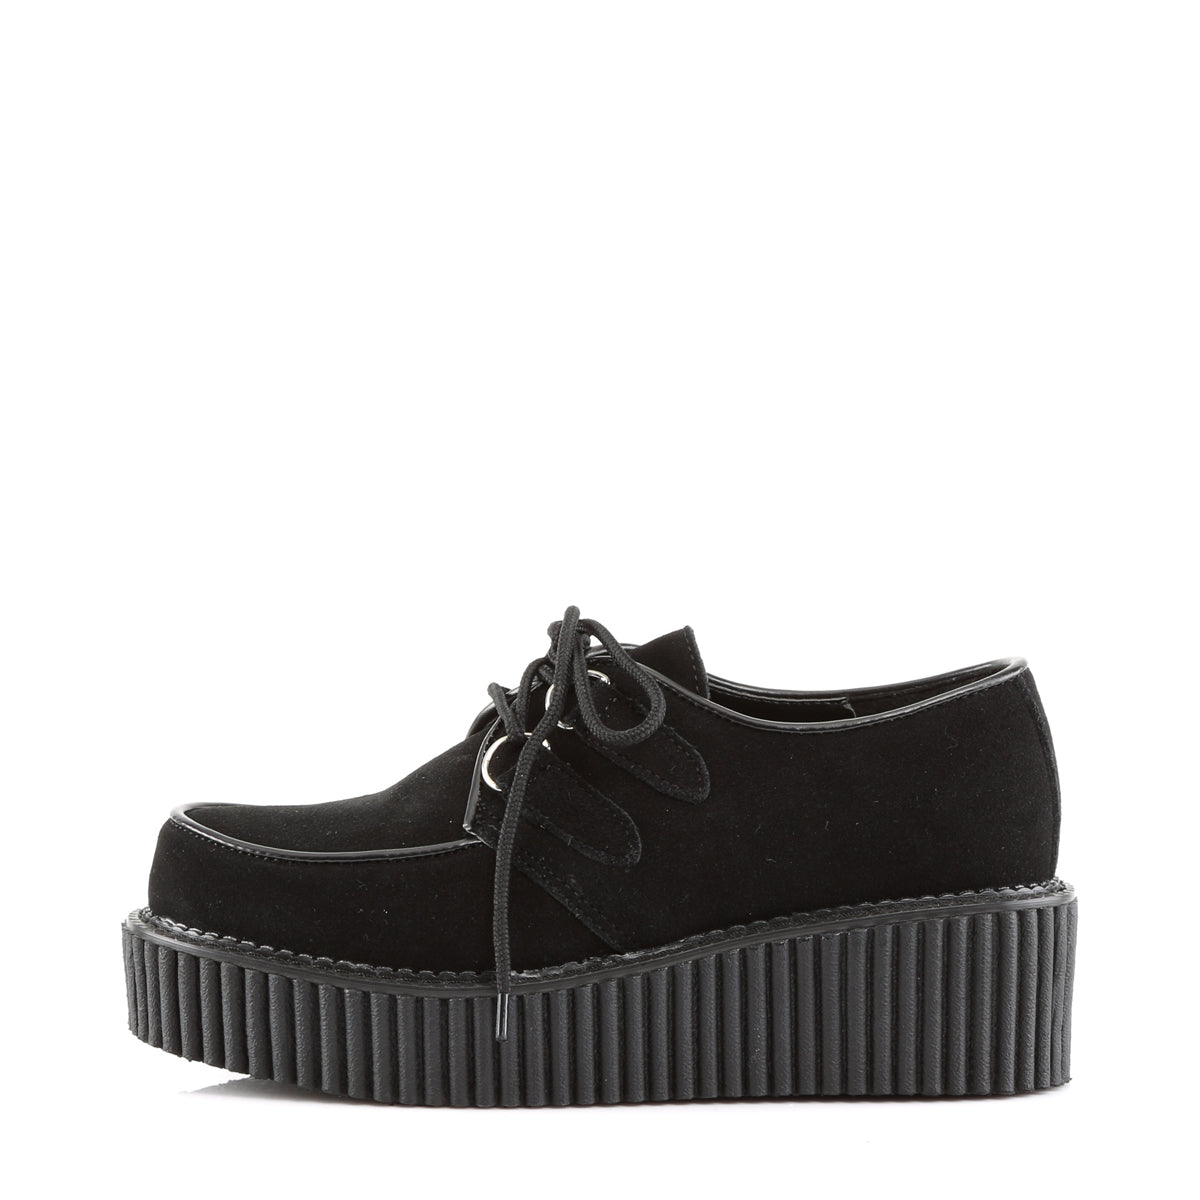 DemoniaCult Womens Low Shoe CREEPER-101 Blk Suede